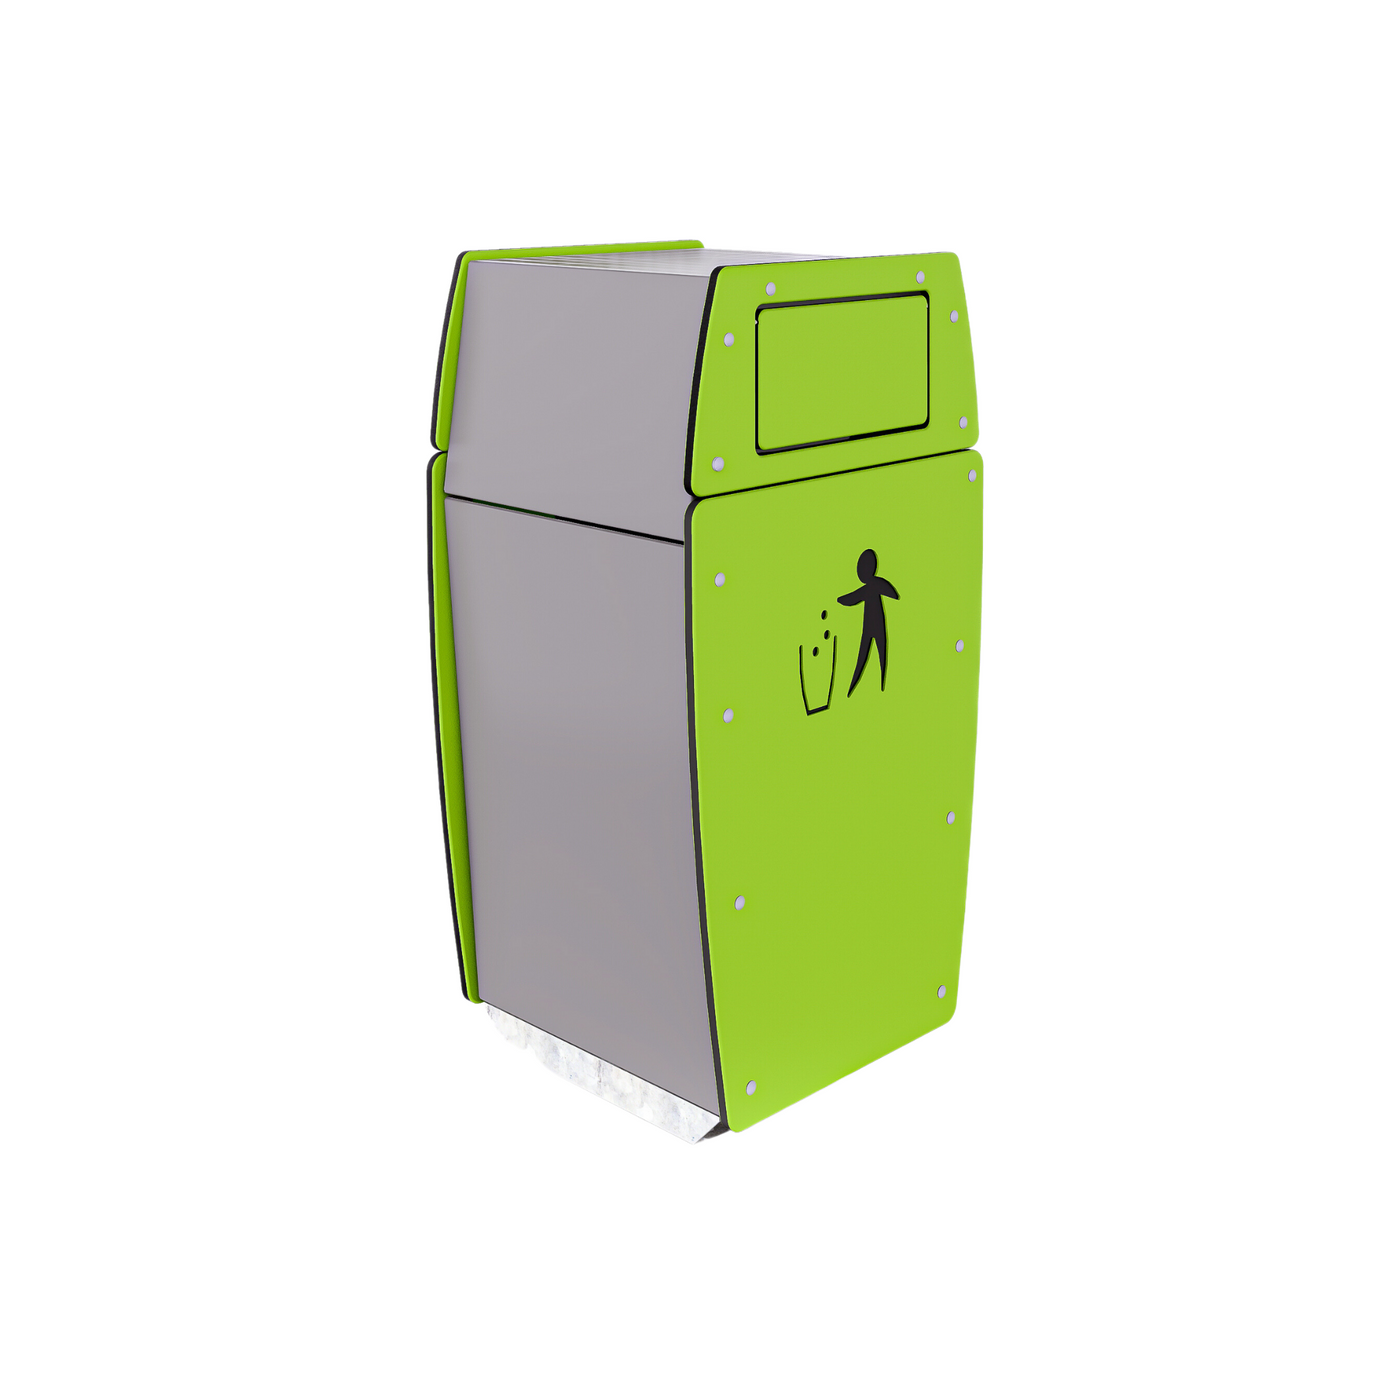 Closed Jazz Waste Management Bin with one container